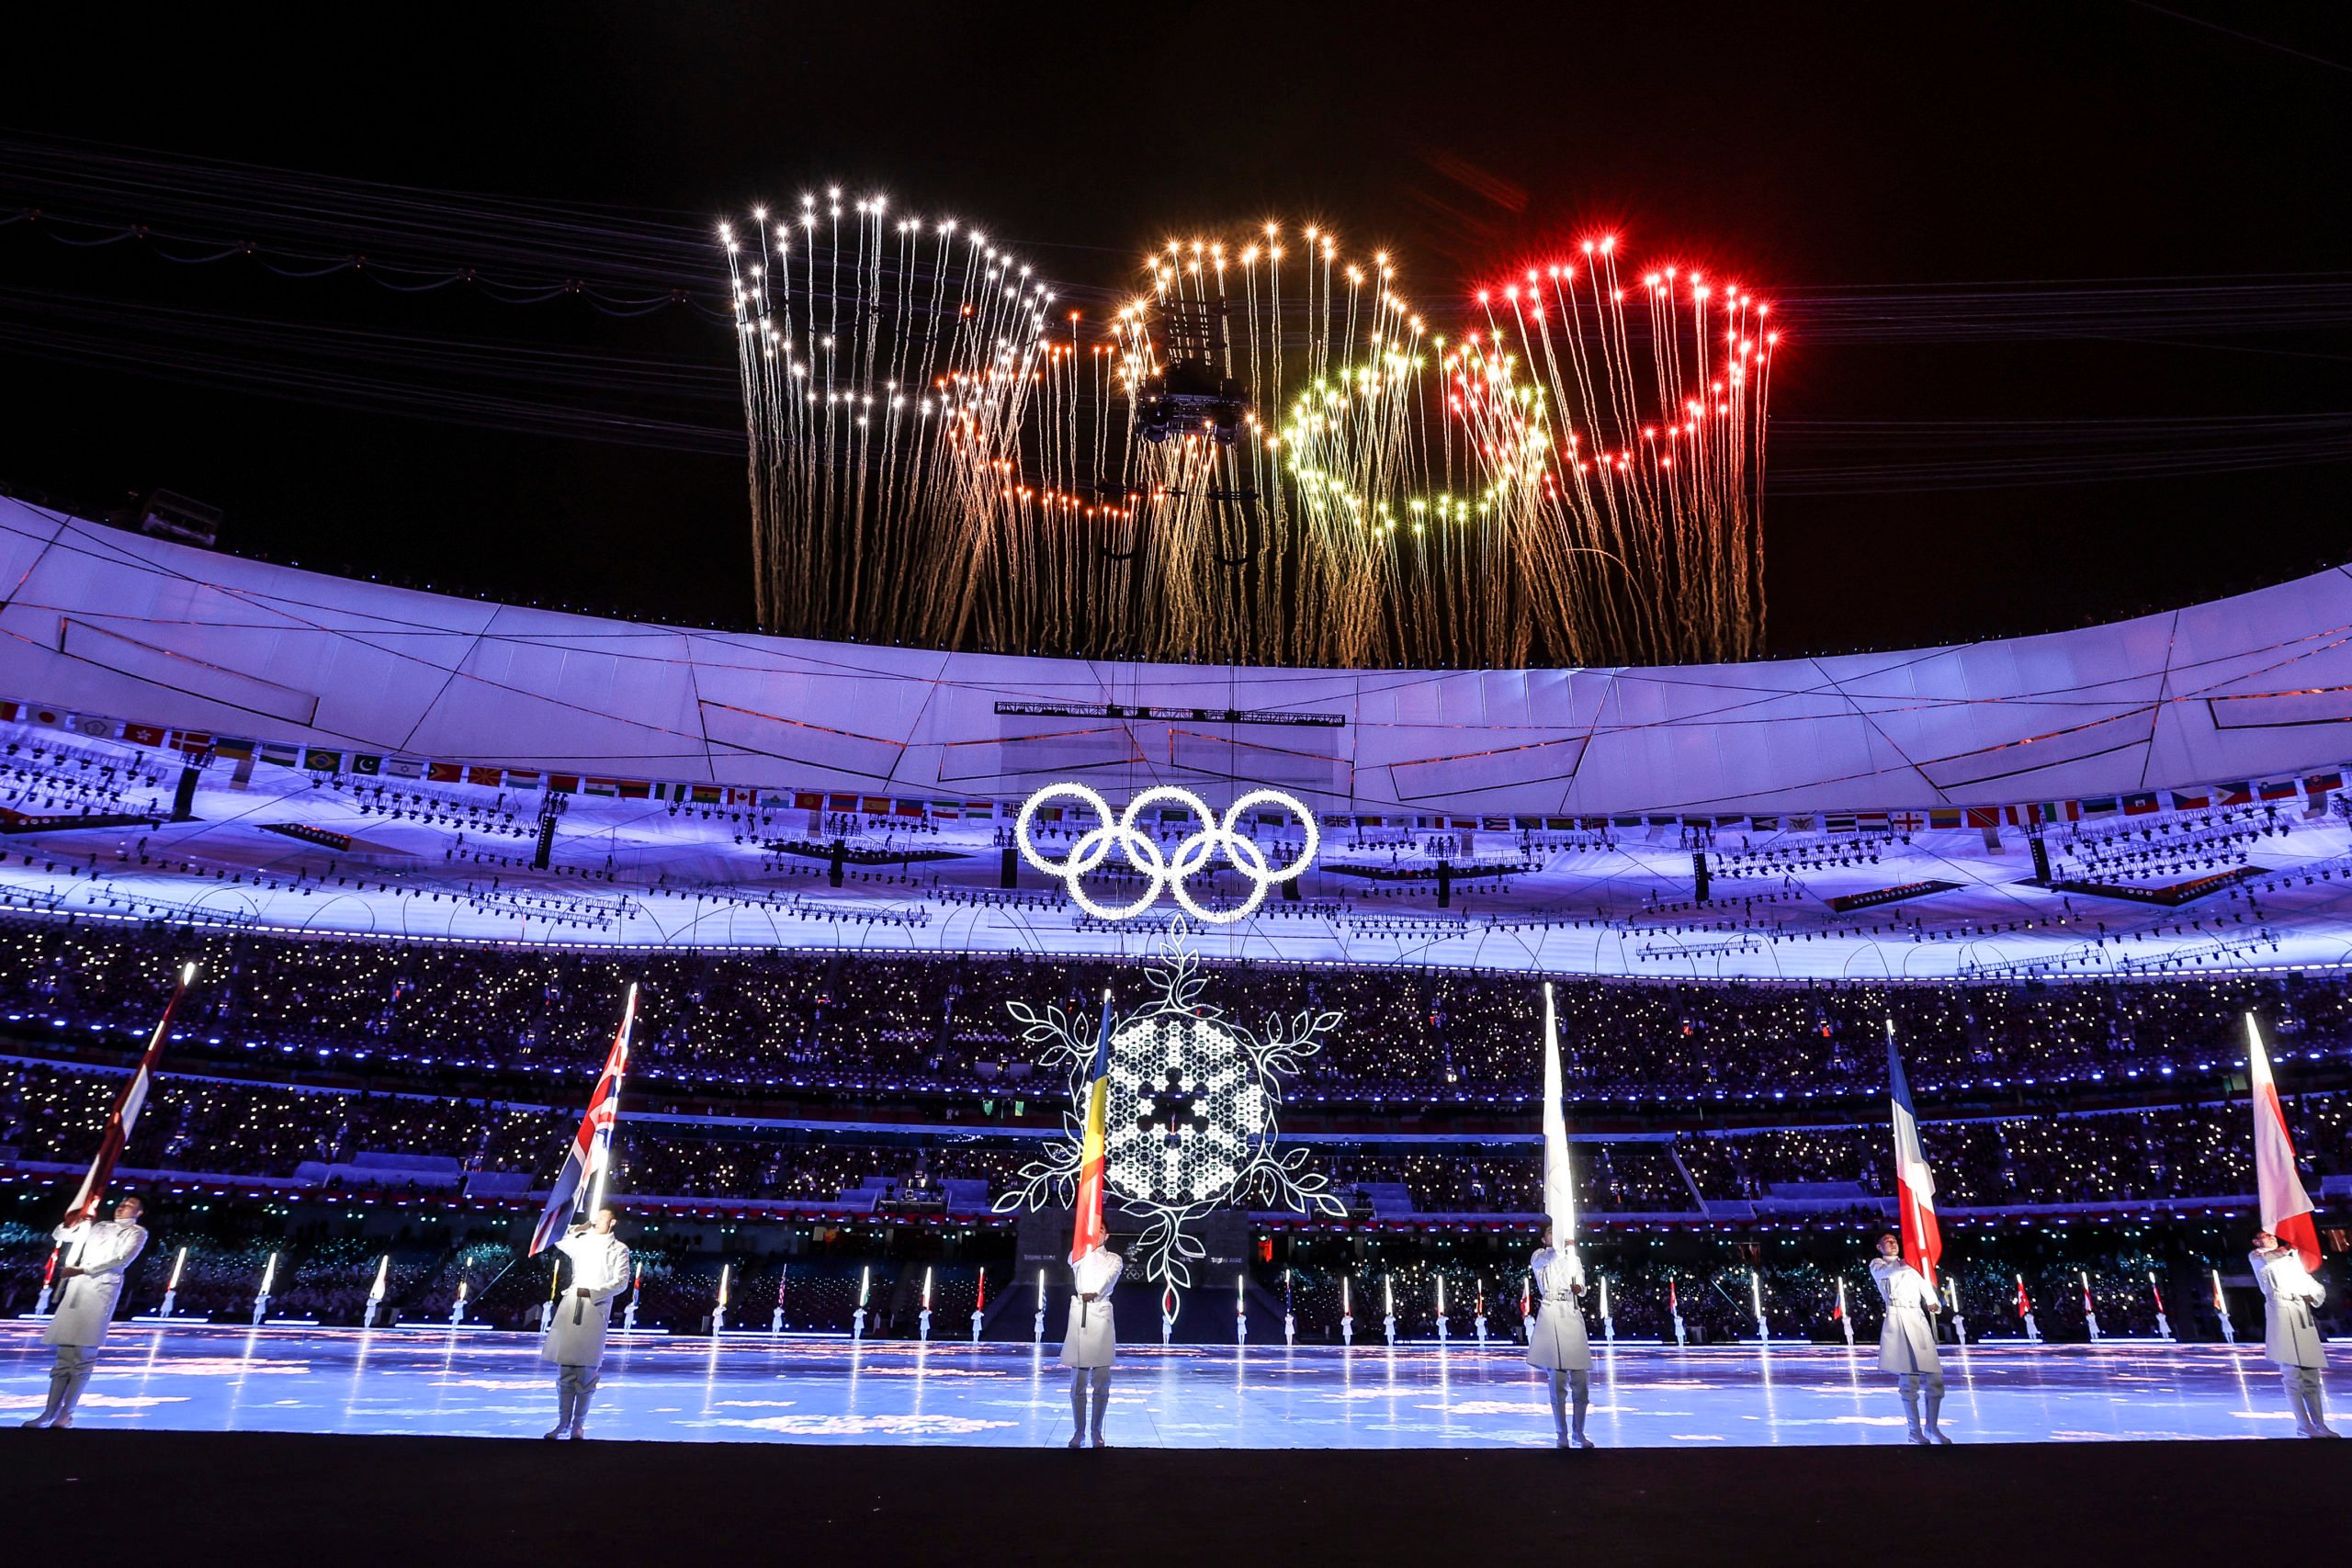 BEIJING, CHINA - FEBRUARY 20: A firework display is seen inside the stadium alongside the Olympic rings during the Beijing 2022 Winter Olympics Closing Ceremony on Day 16 of the Beijing 2022 Winter Olympics at Beijing National Stadium on February 20, 2022 in Beijing, China. (Photo by Maja Hitij/Getty Images)